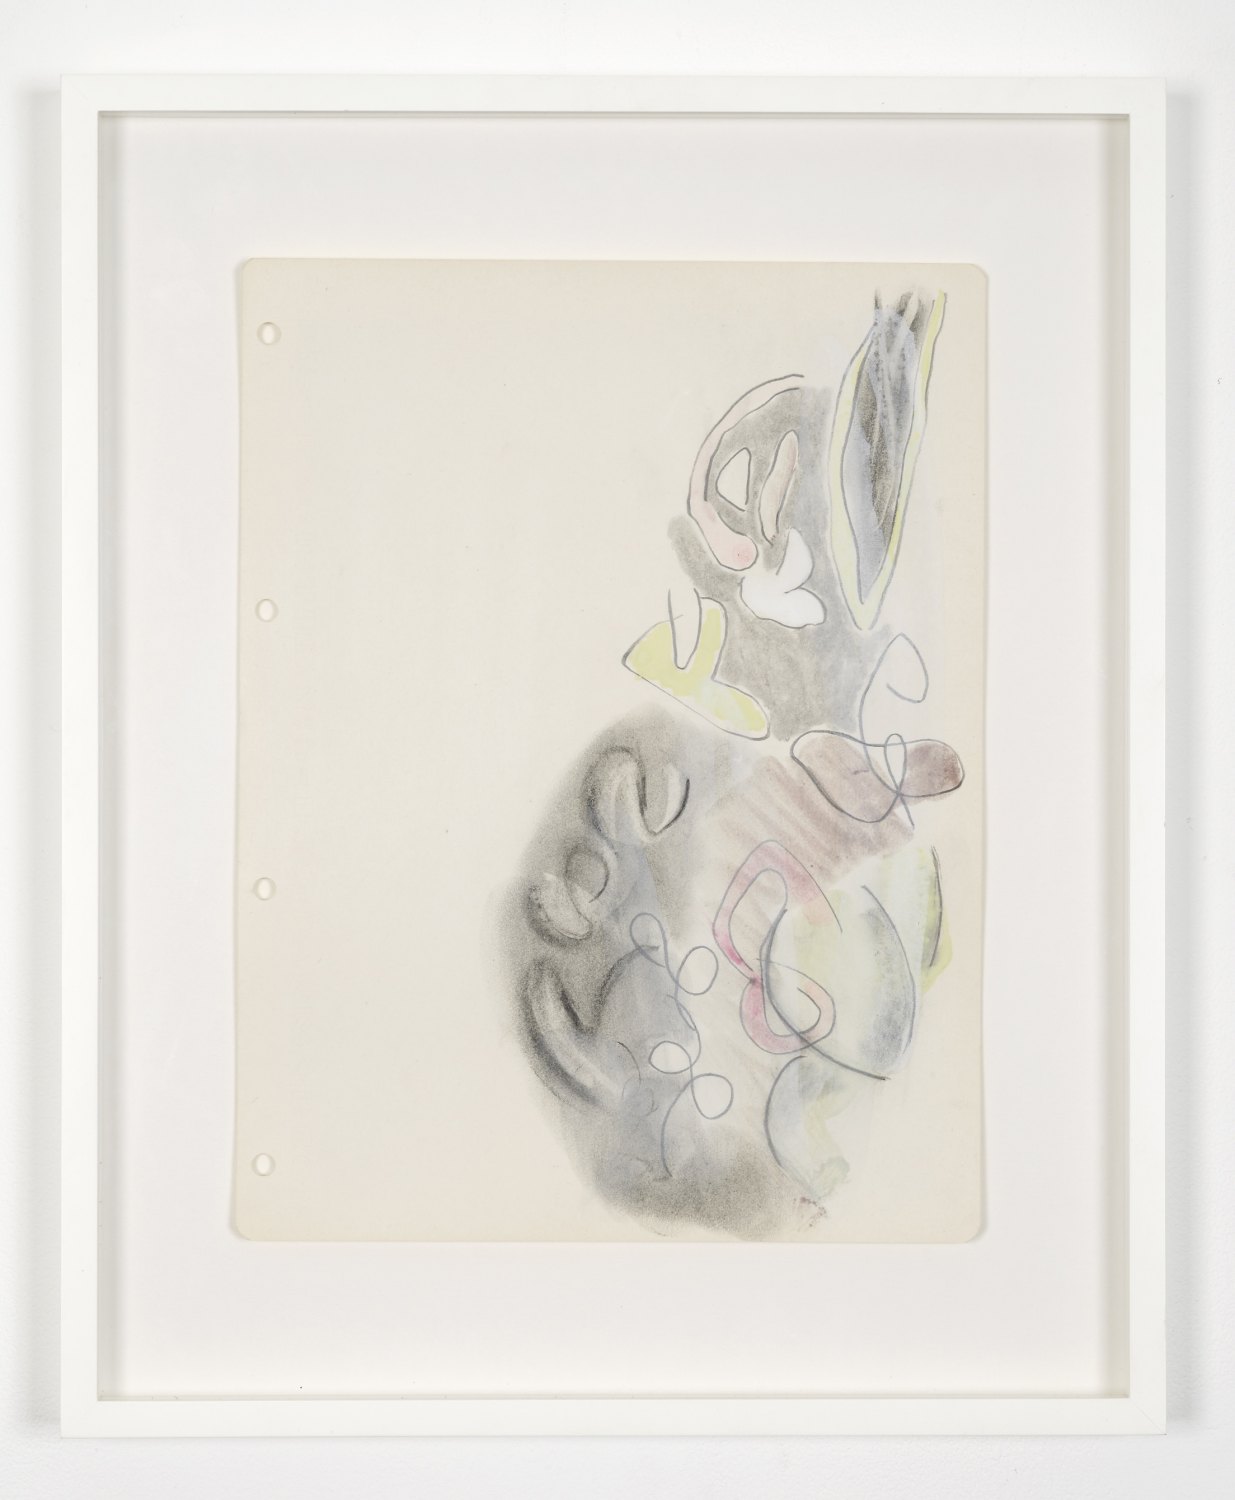 Marc Camille Chaimowicz From Series Three..., 1997 Pencil, ink, and gouache on paper, 60 × 47 cm